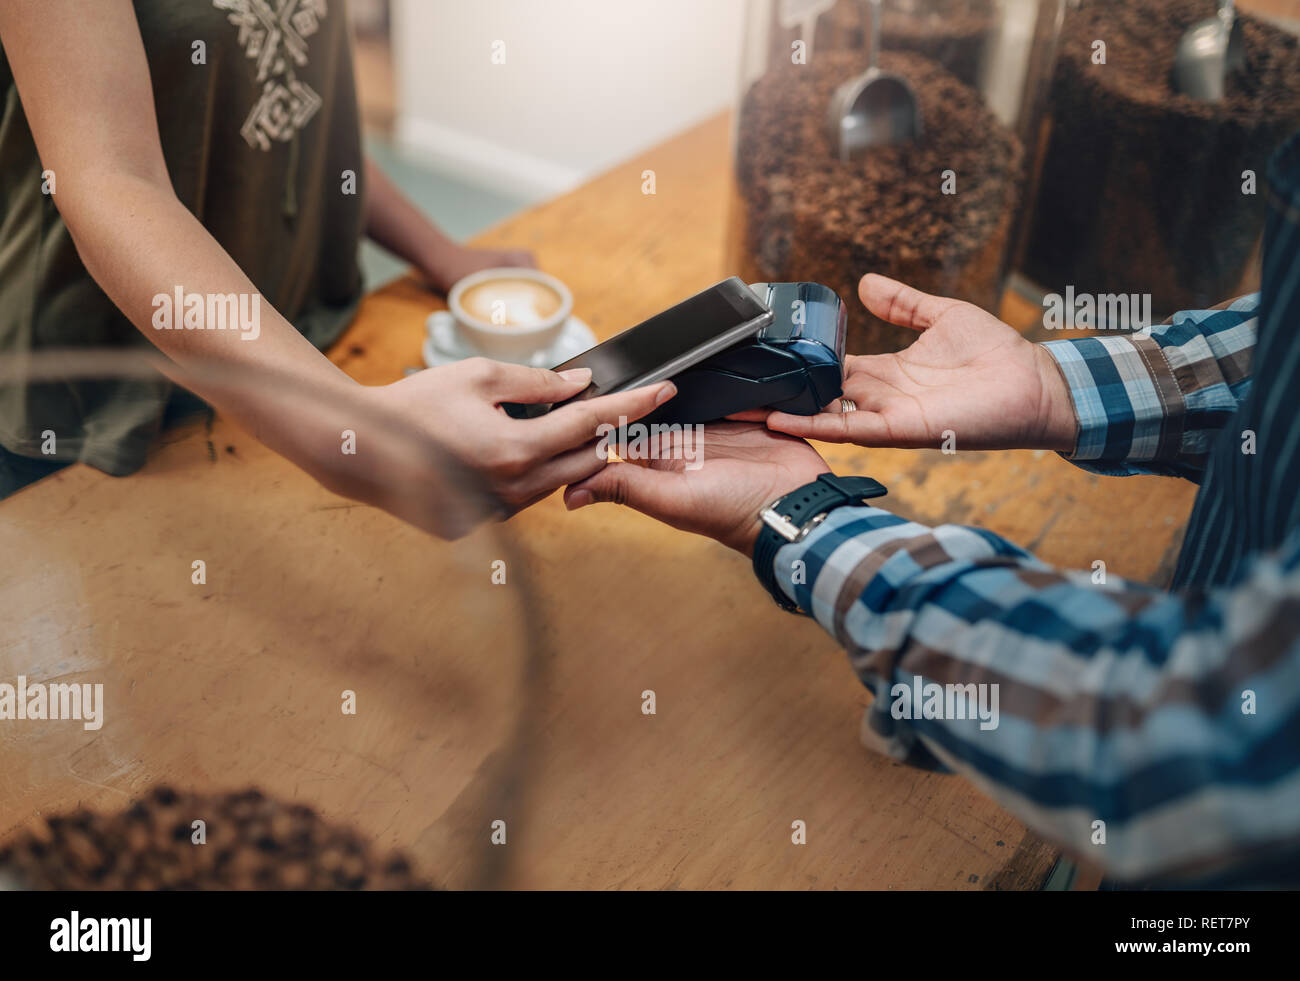 Customer making wireless or contactless payment using credit card using NFC technology. focus on hands Stock Photo